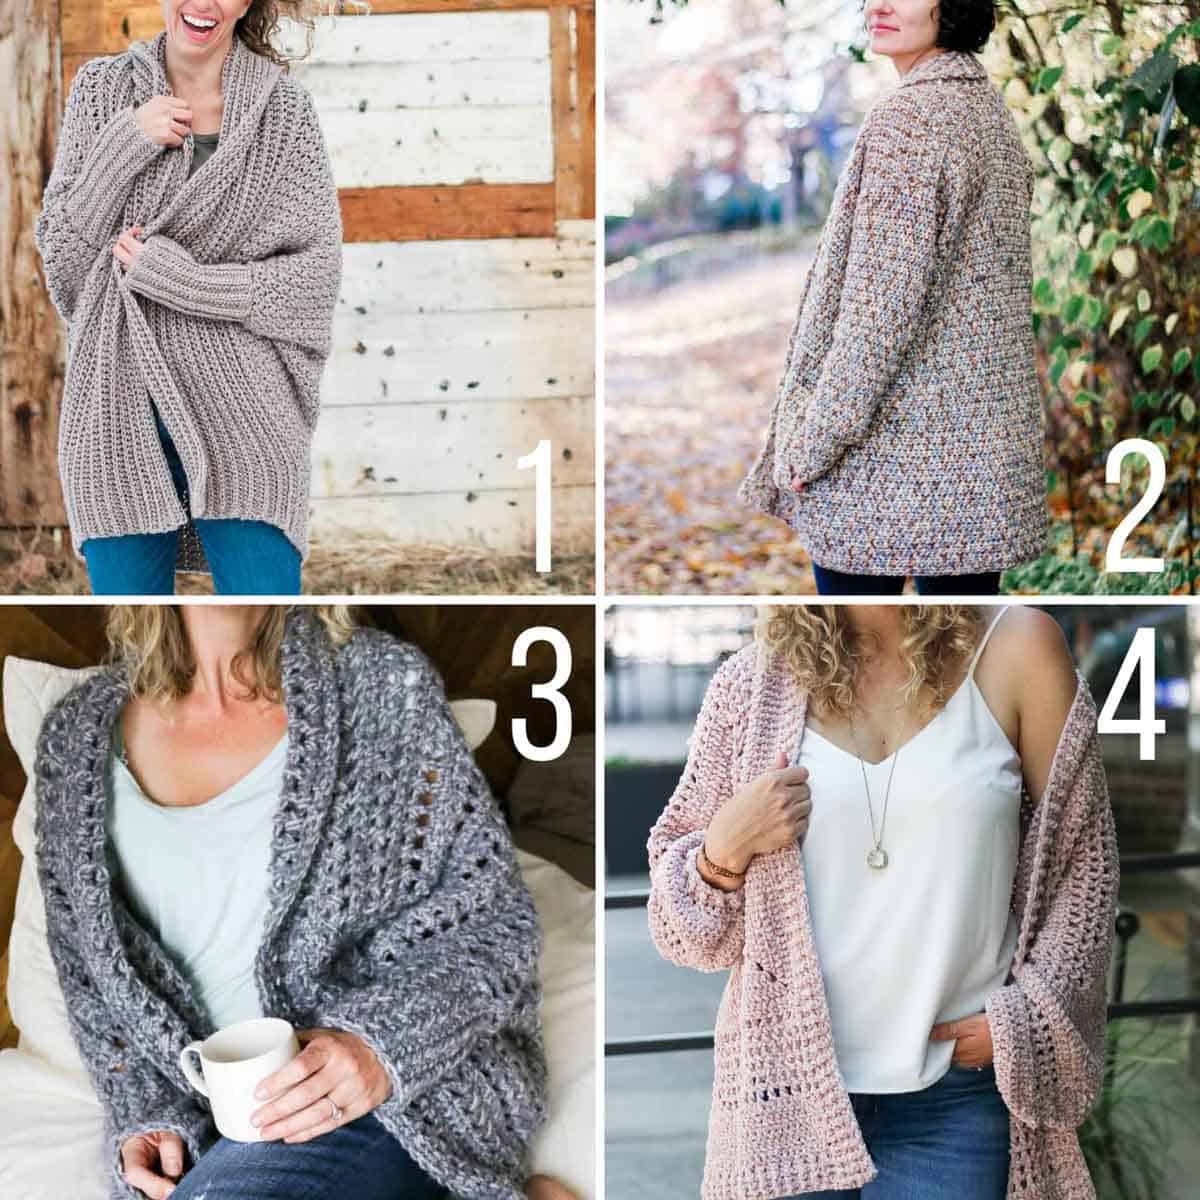 Four free crochet cardigan patterns from Make & Do Crew. All of these are free crochet patterns made with Lion Brand yarn.